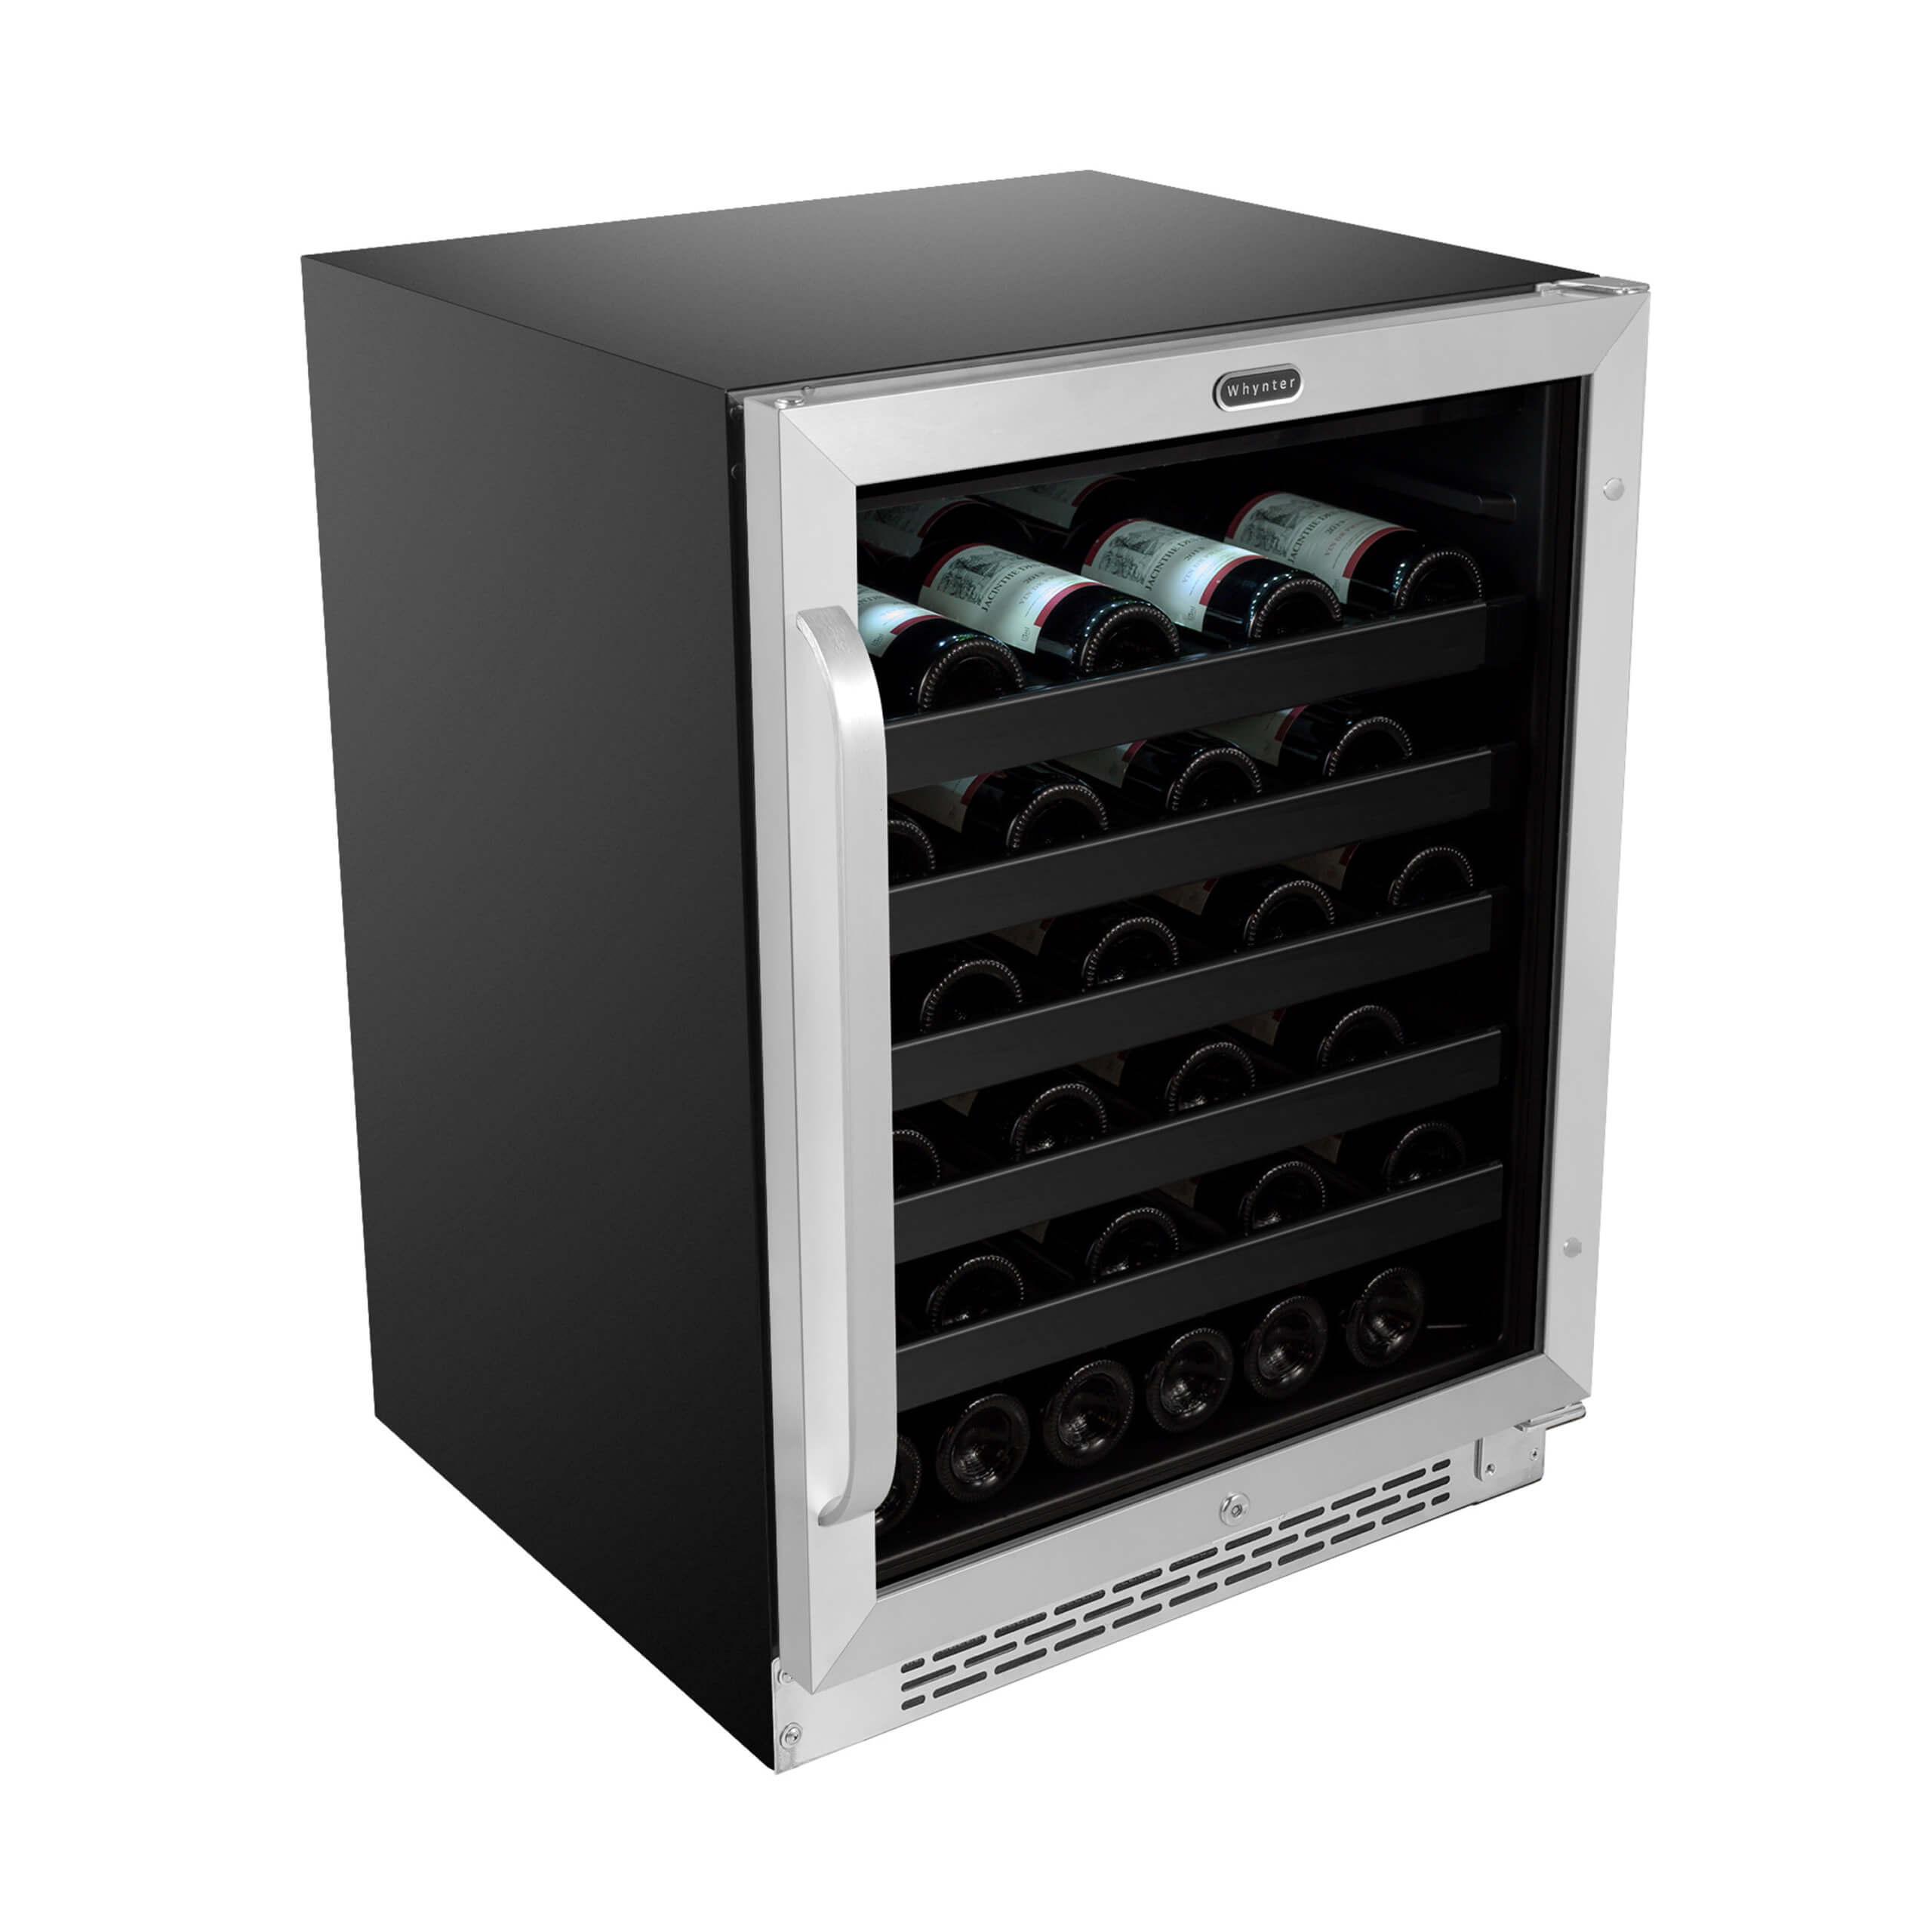 Whynter - BWR-408SB 24 inch Built-In 46 Bottle Undercounter Stainless Steel Wine Refrigerator with Reversible Door, Digital Control, Lock and Carbon Filter  | BWR-408SB